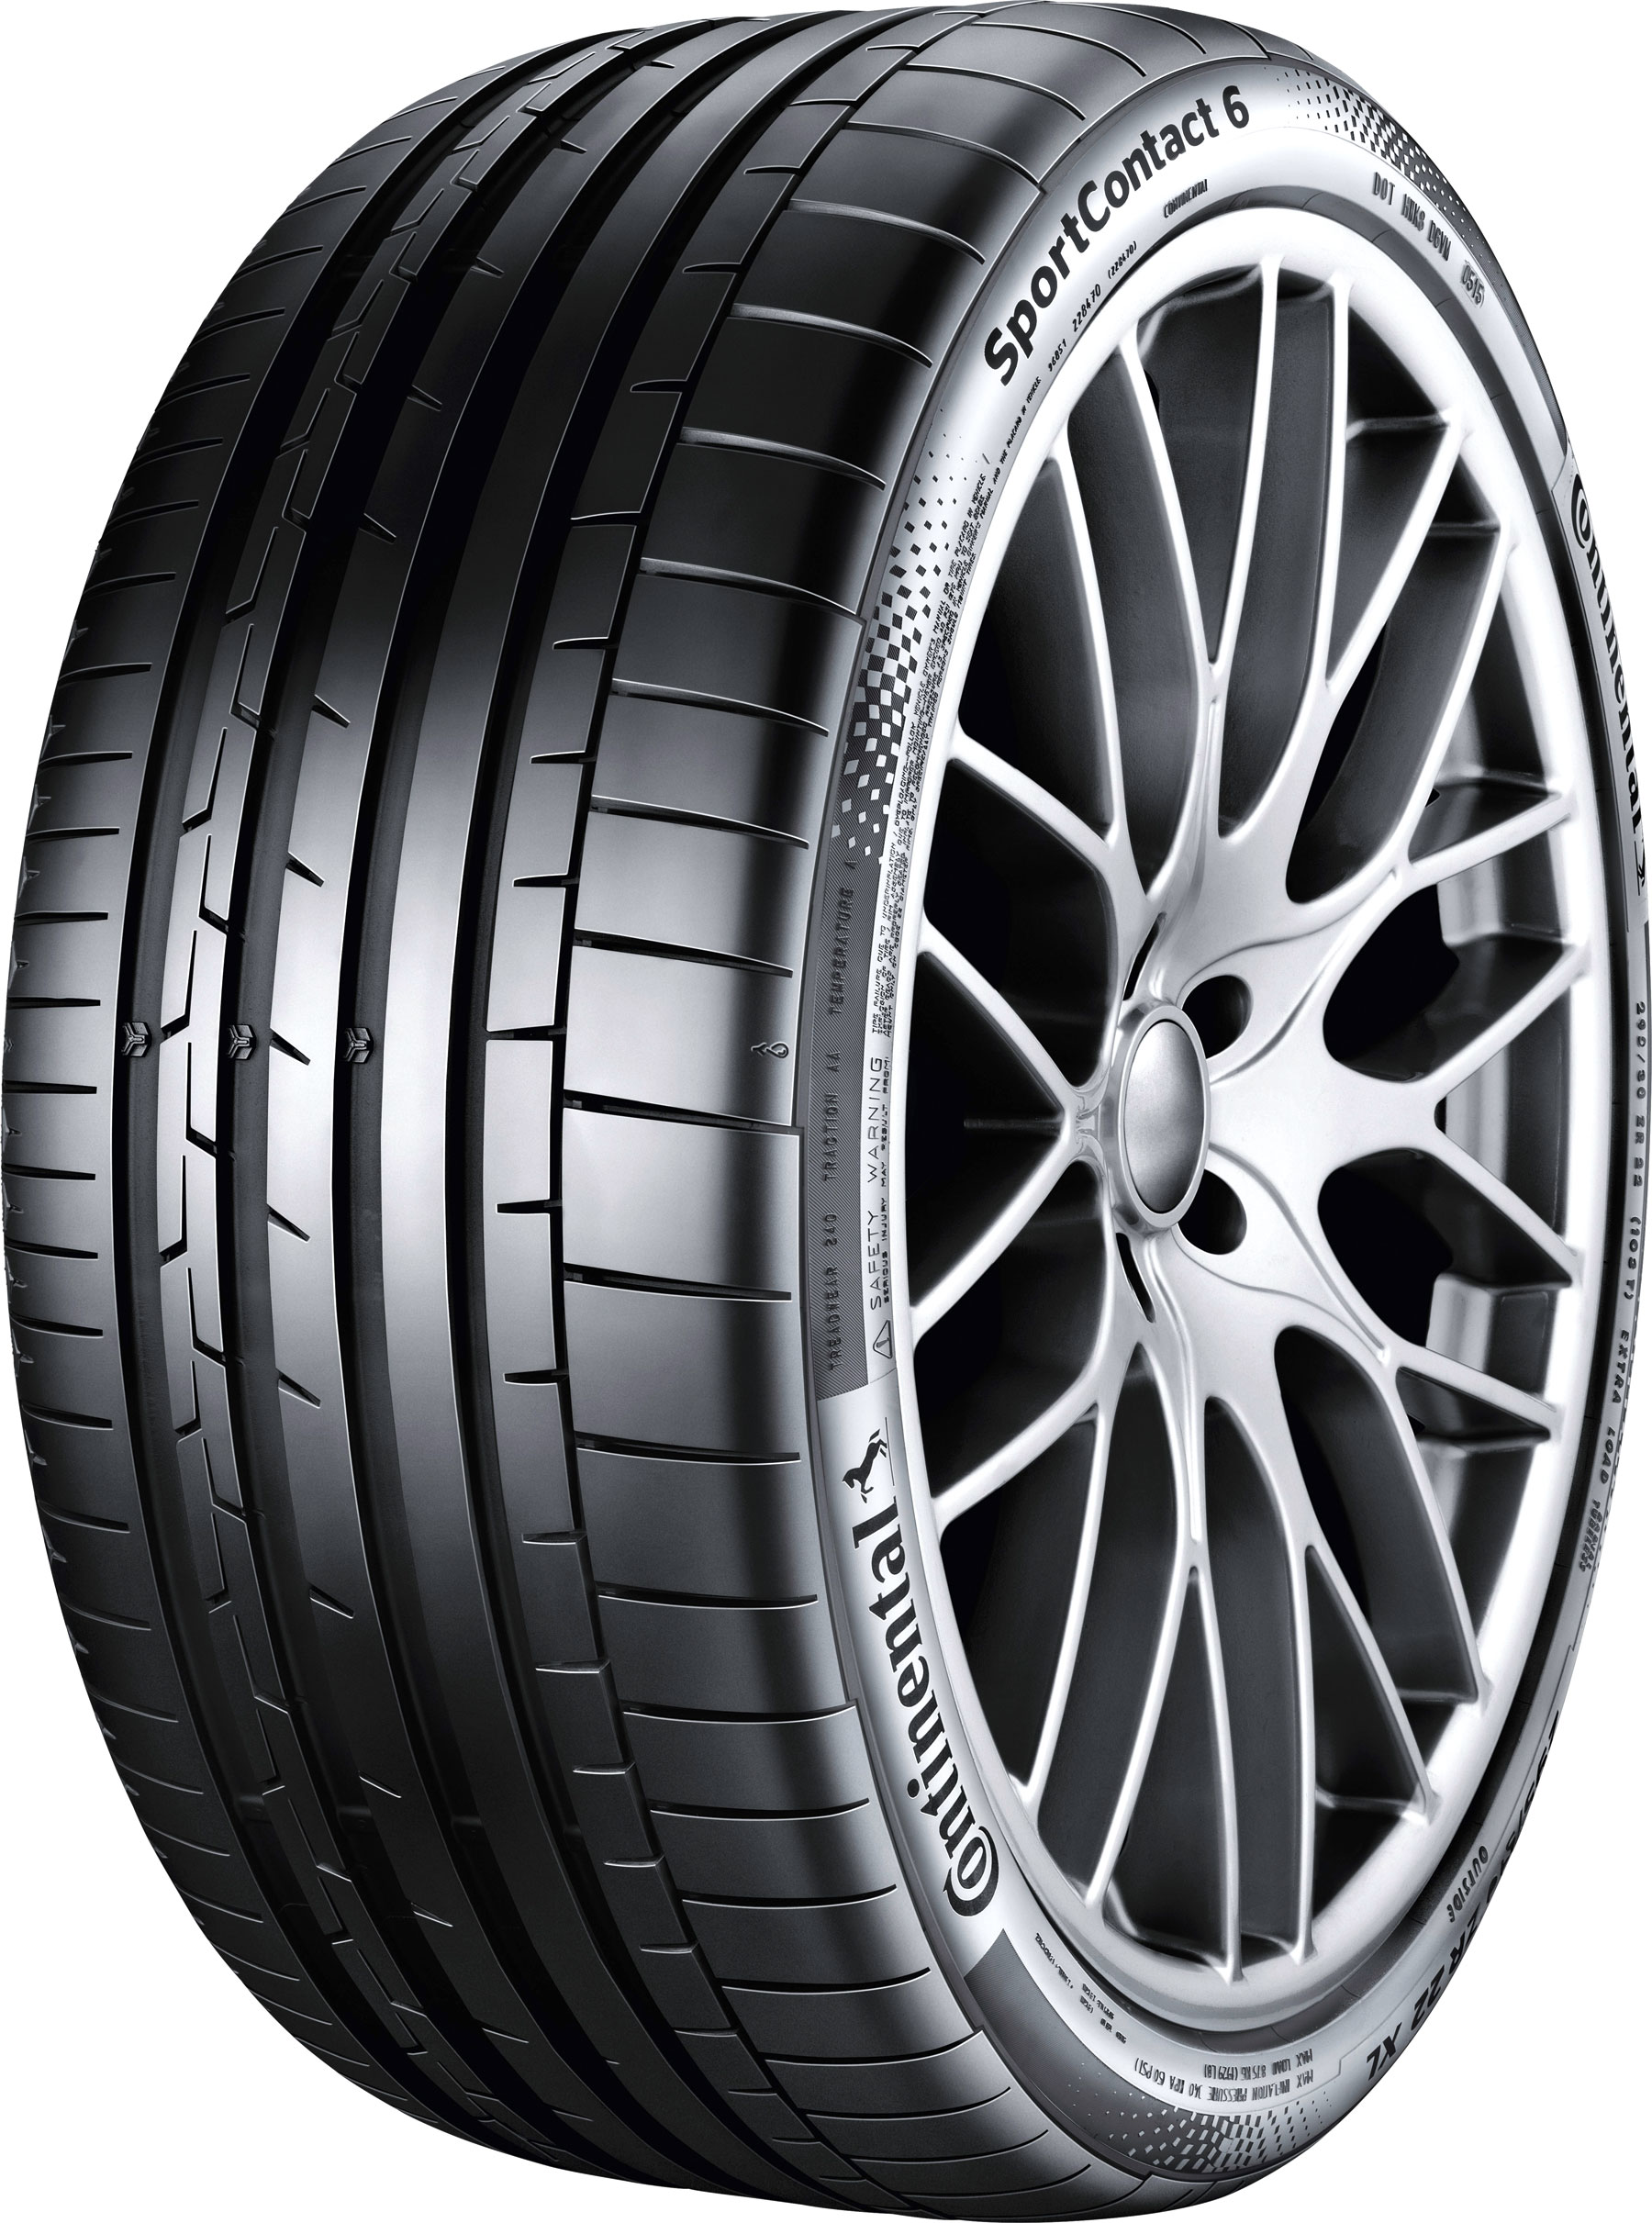 Summer tires of CONTINENTAL ❱❱ SportContact 6 235/40 R18 95Y XL FR -  Tirestore Diana